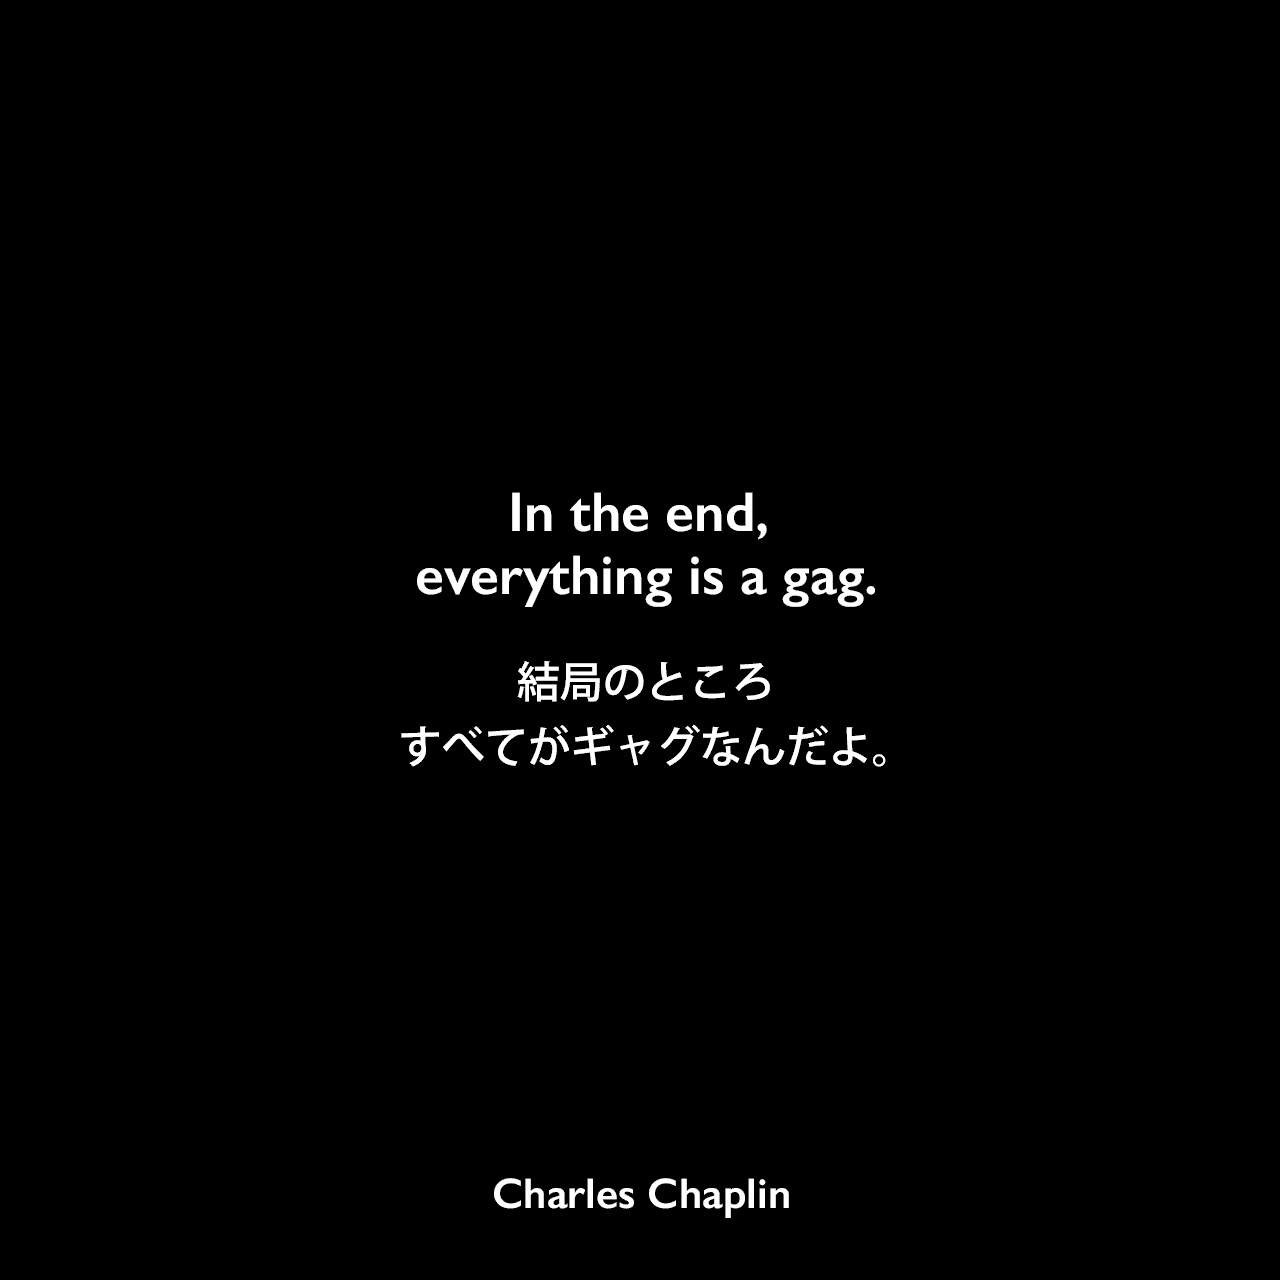 In the end, everything is a gag.結局のところ、すべてがギャグなんだよ。Charles Chaplin